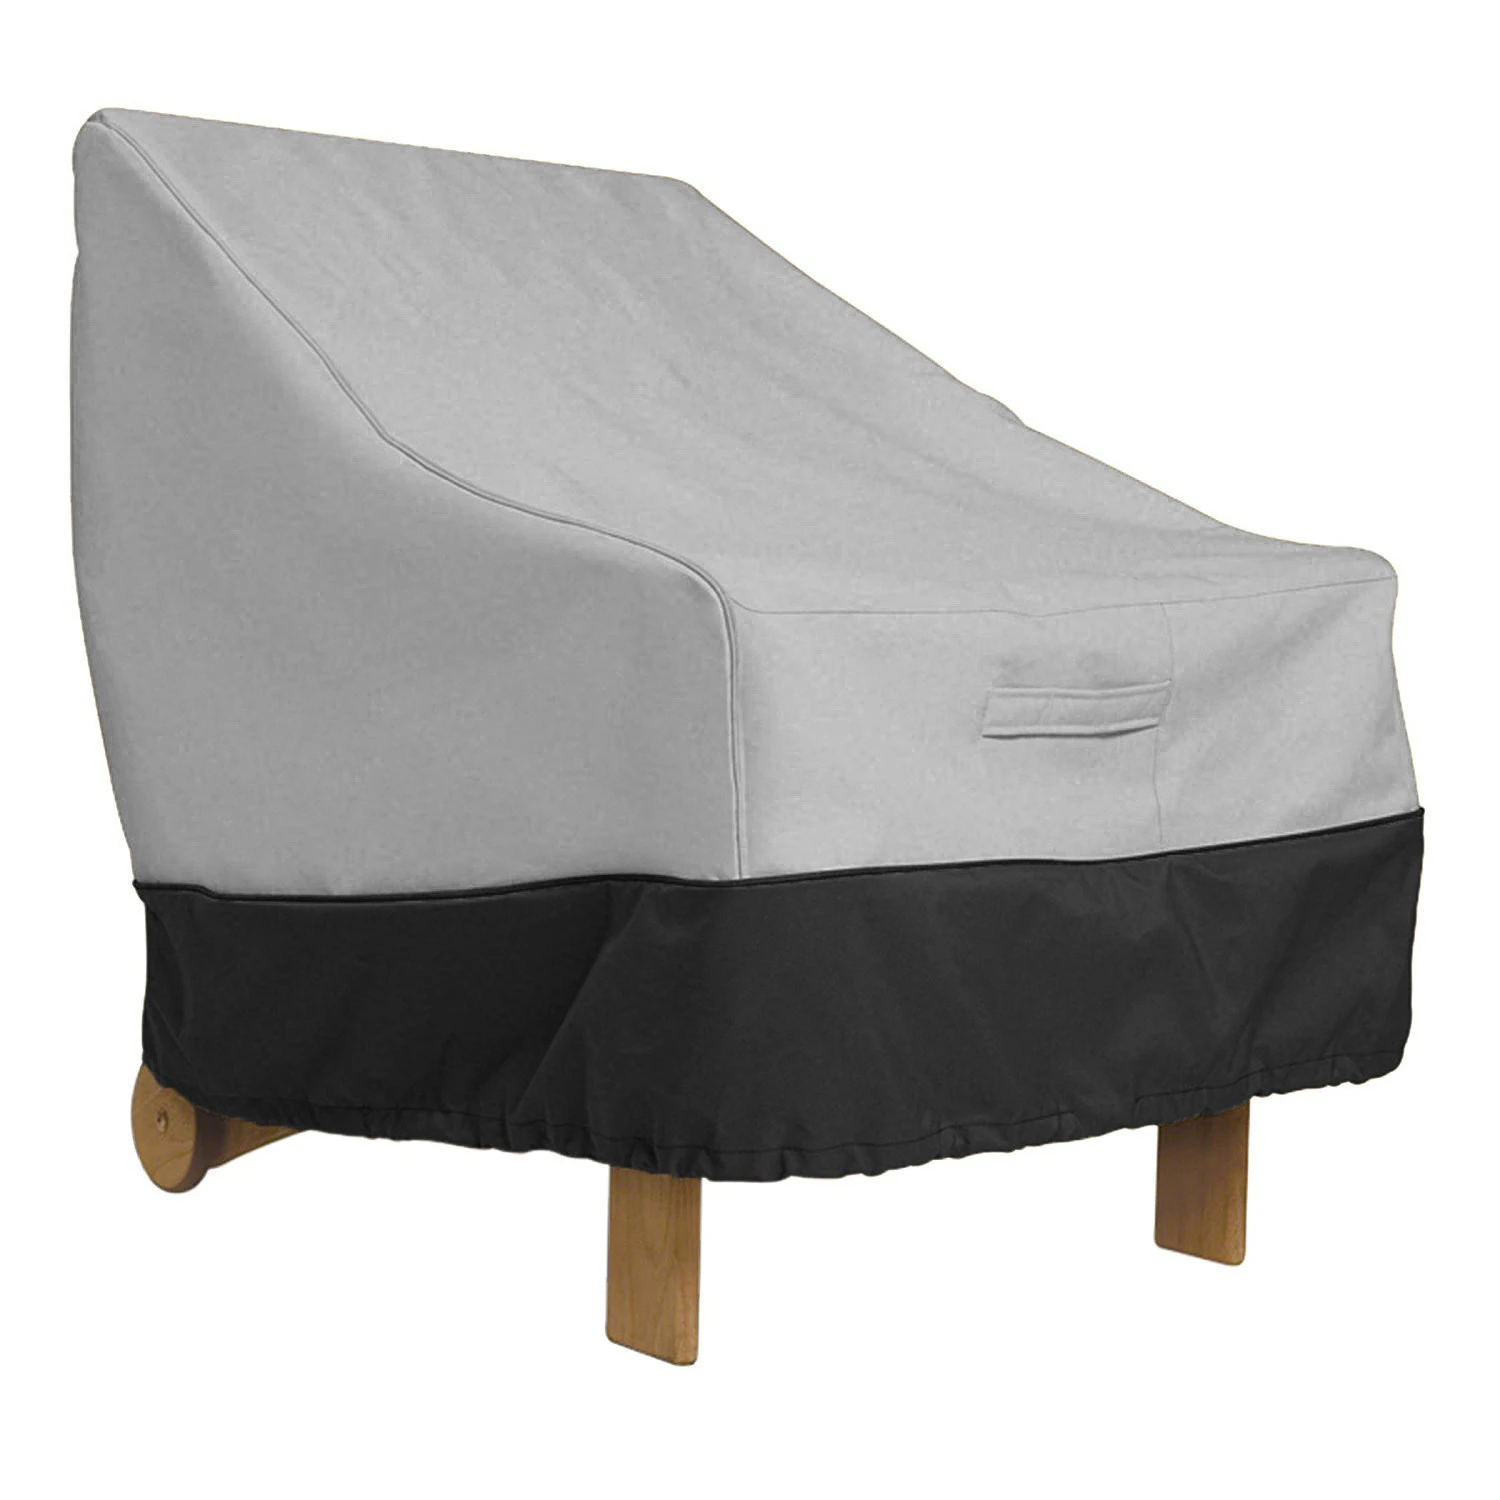 Custom design low MOQ acceptable High Quality Garden UV Resistant Chair Cover